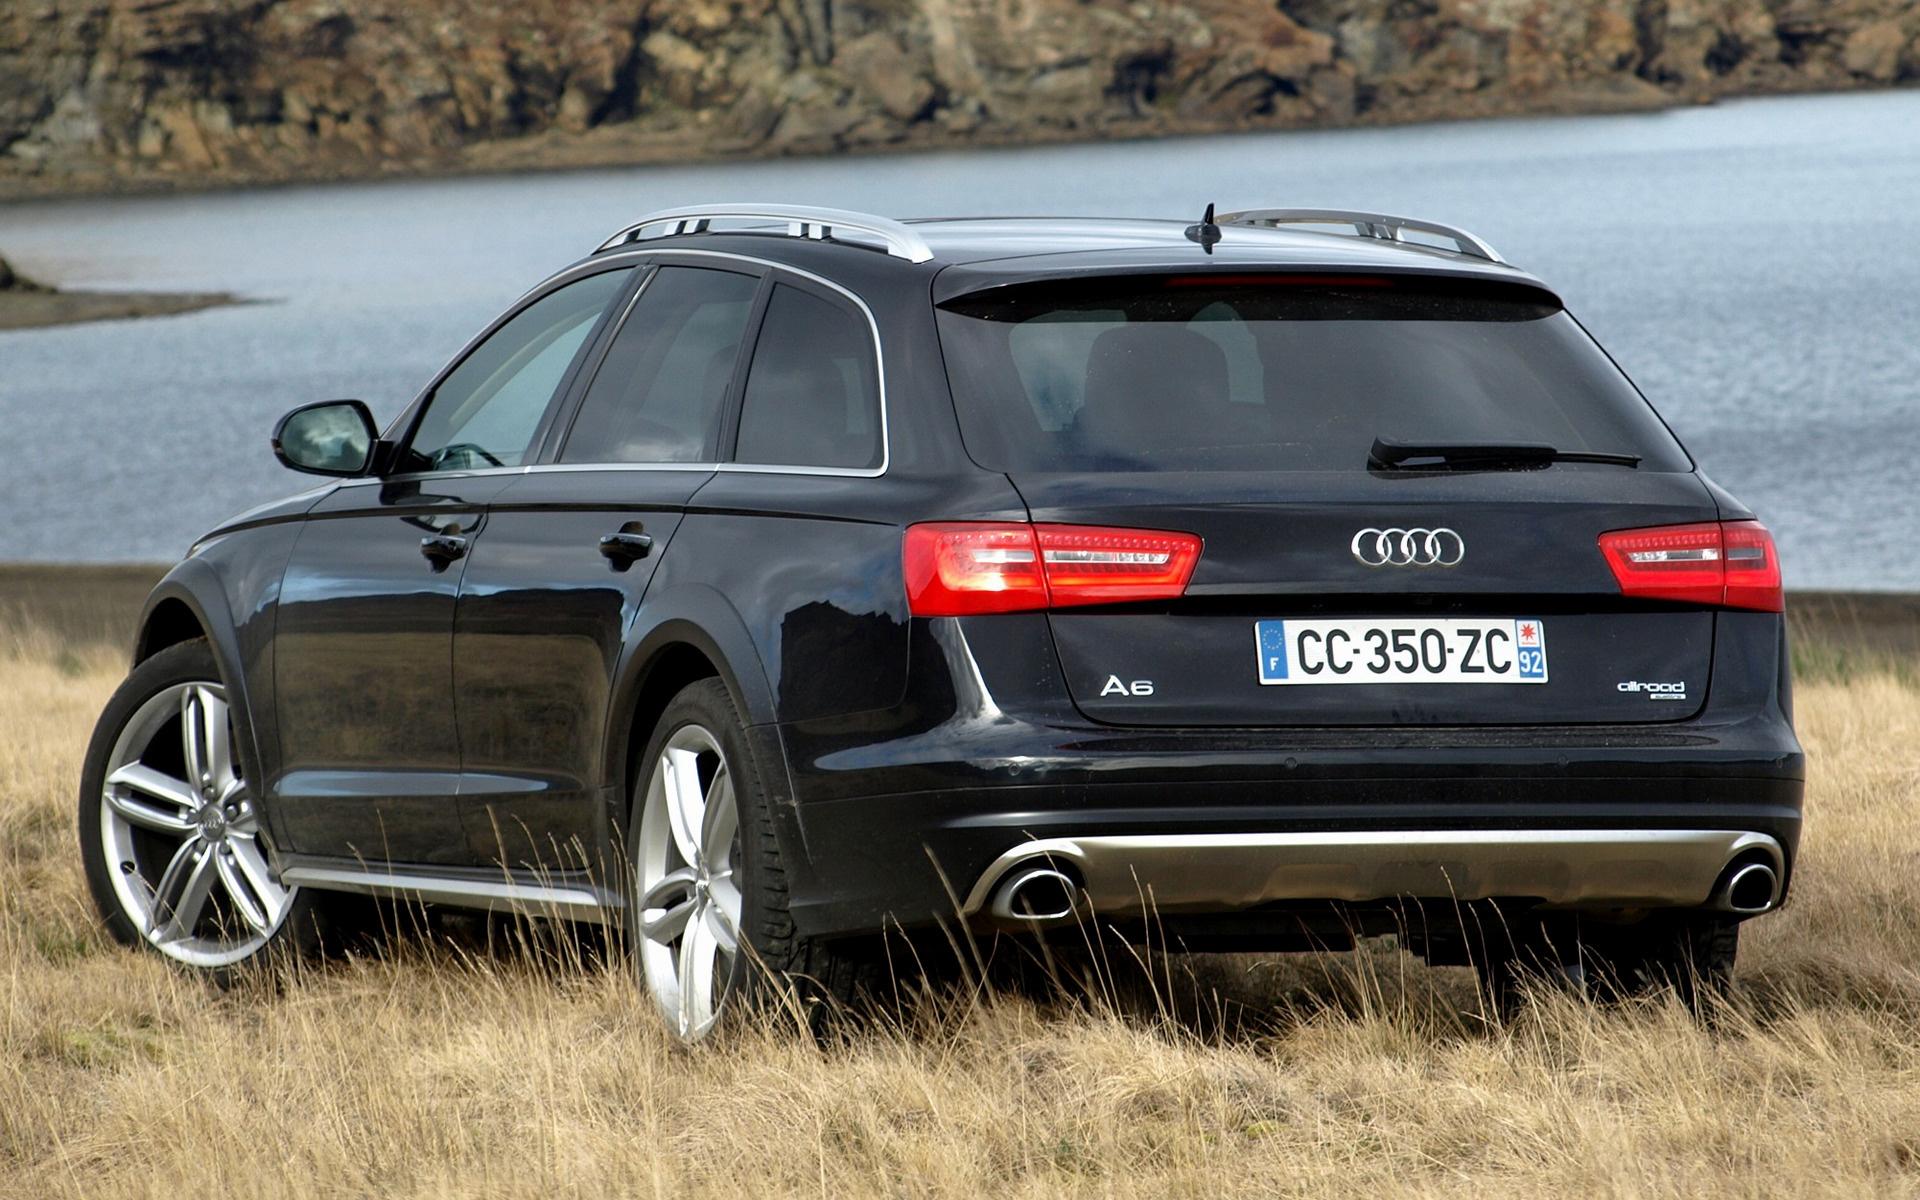 Audi A6 Allroad and HD Image